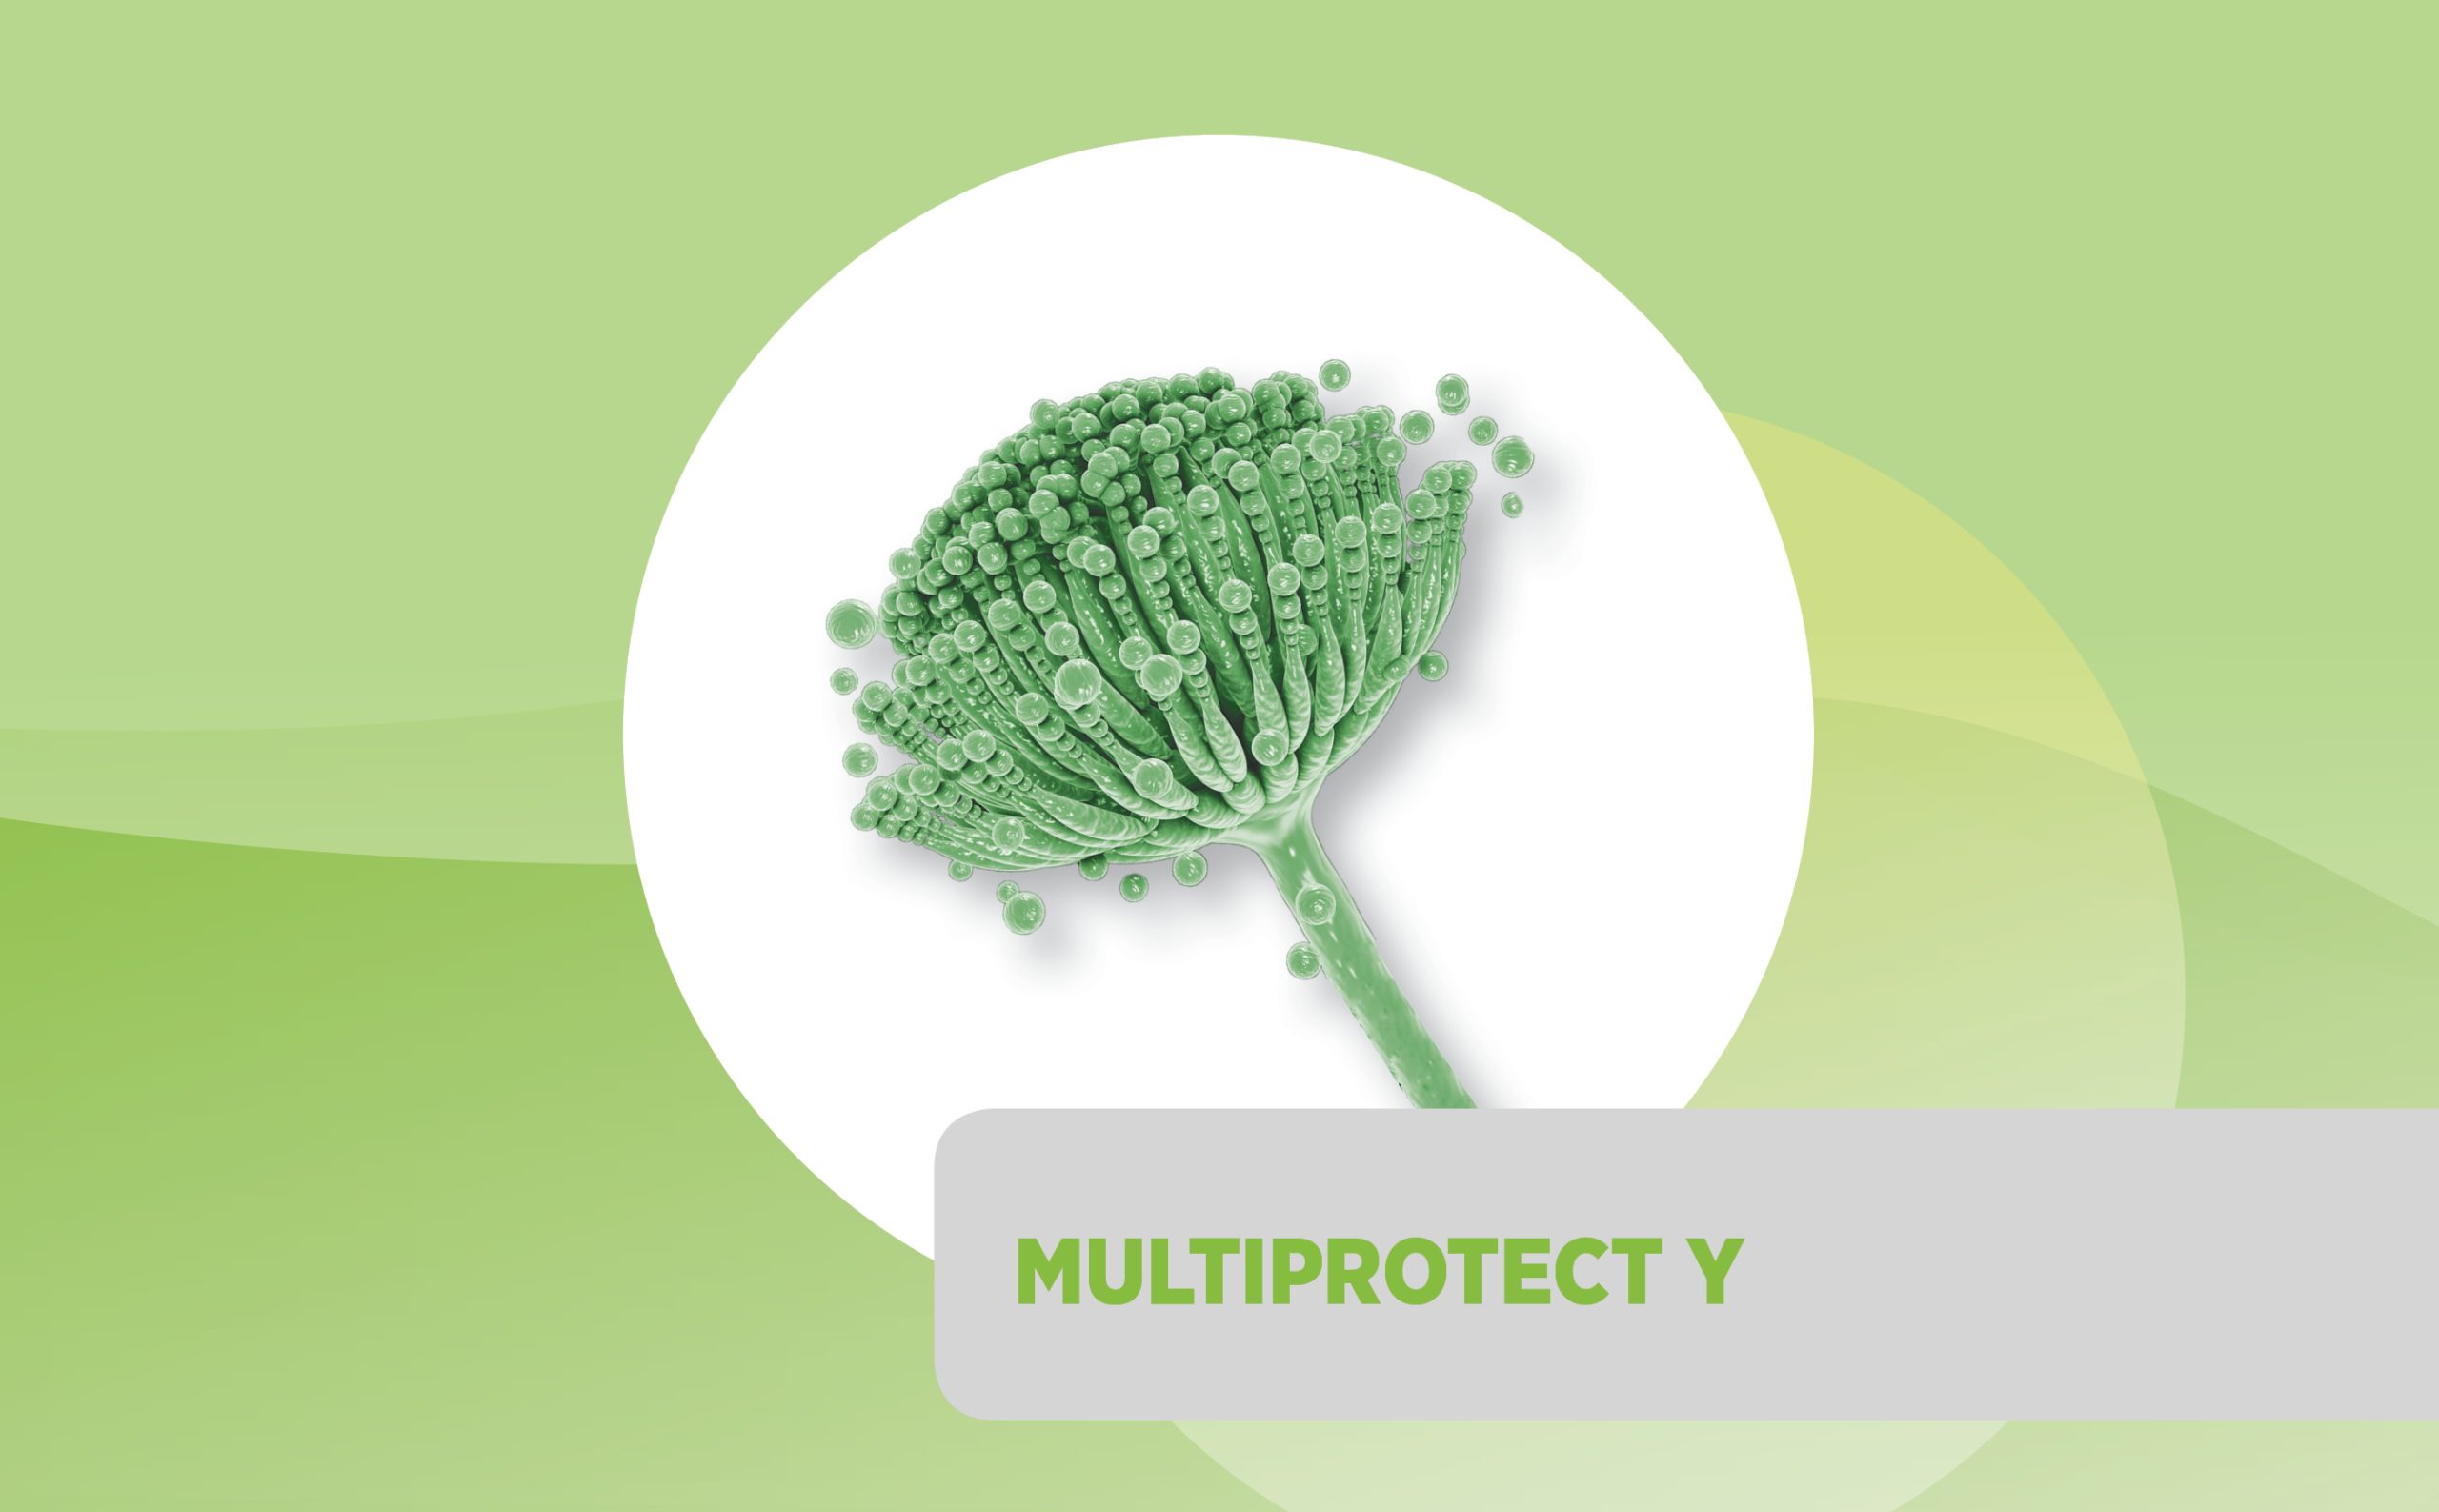 Multiprotect Y